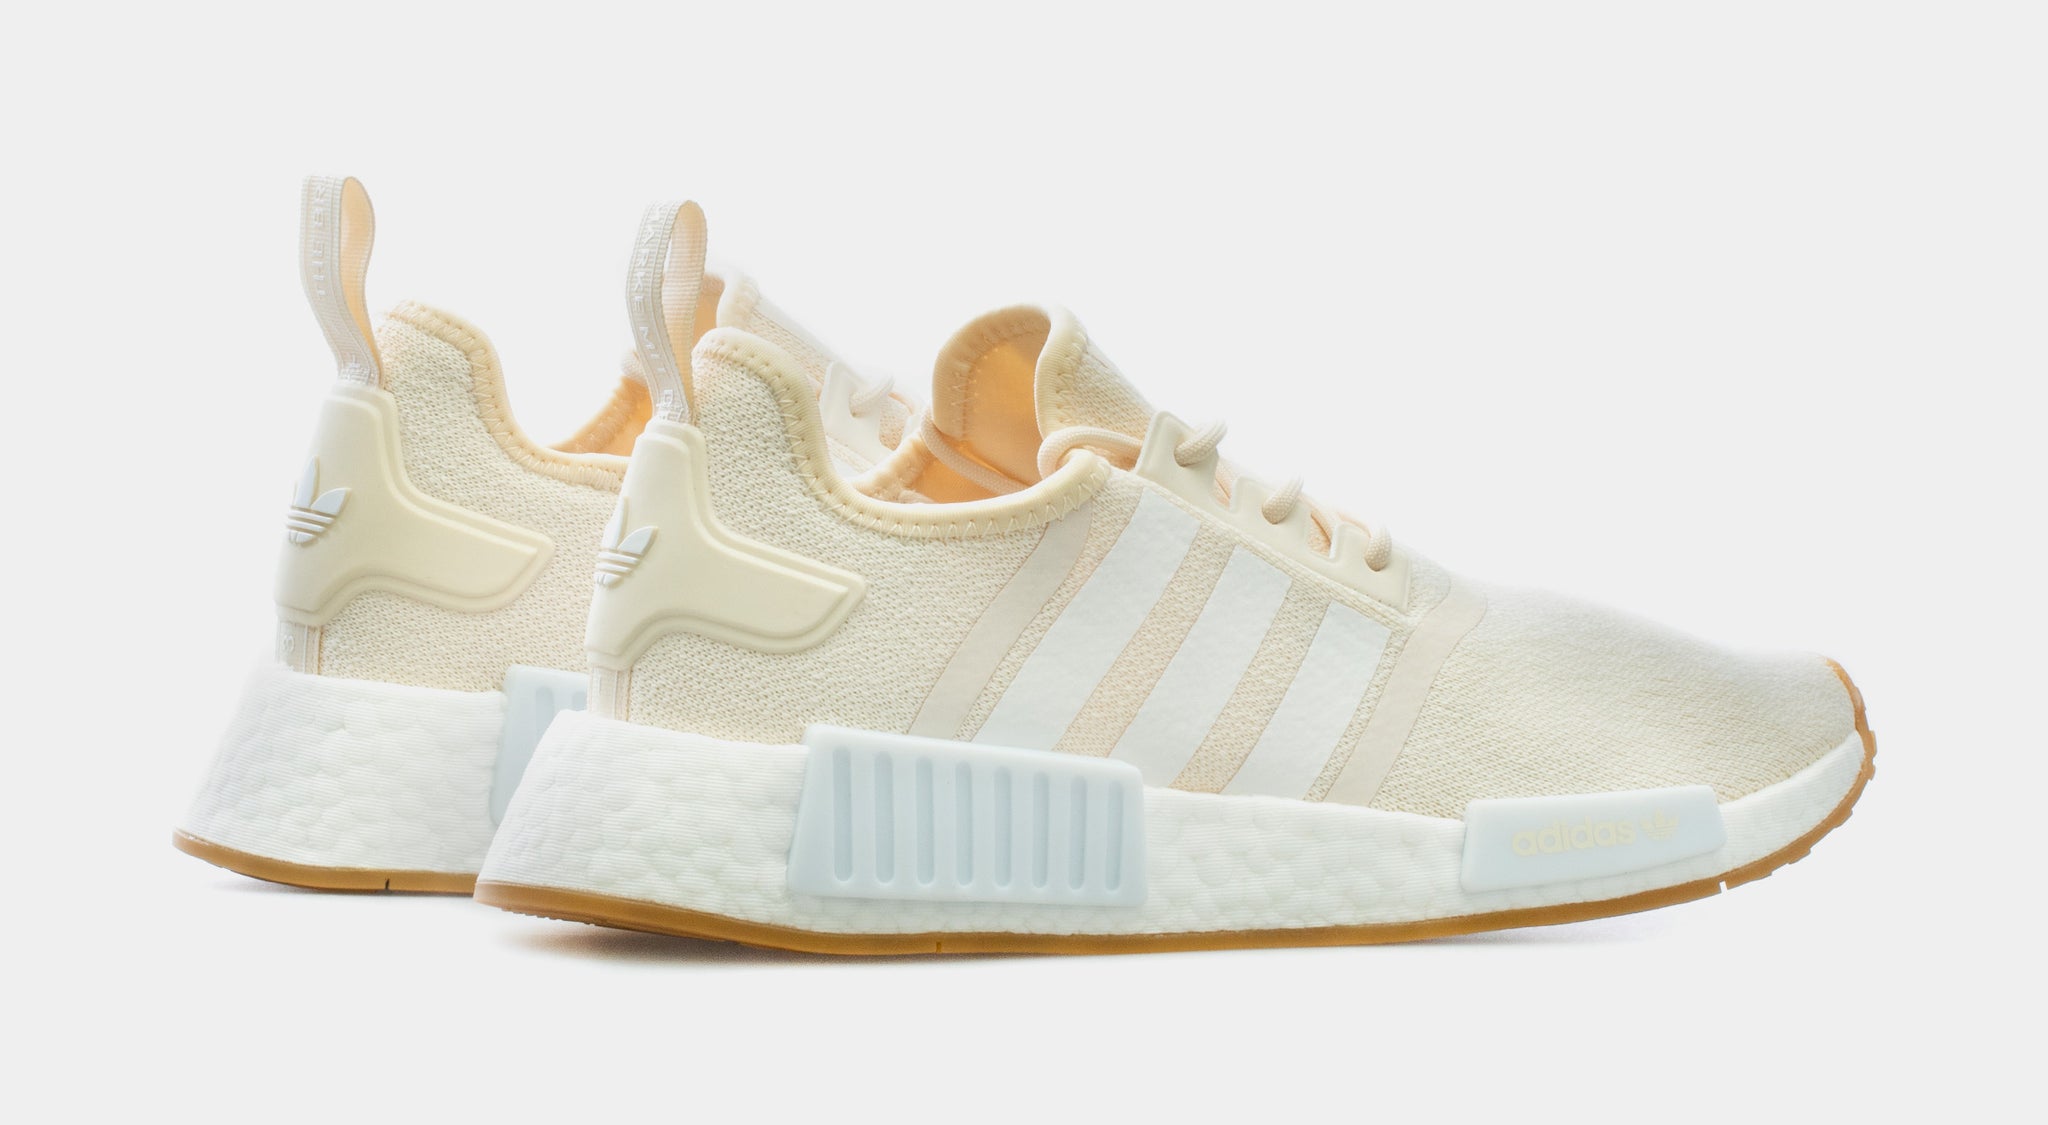 adidas NMD_R1 Shoes - Beige